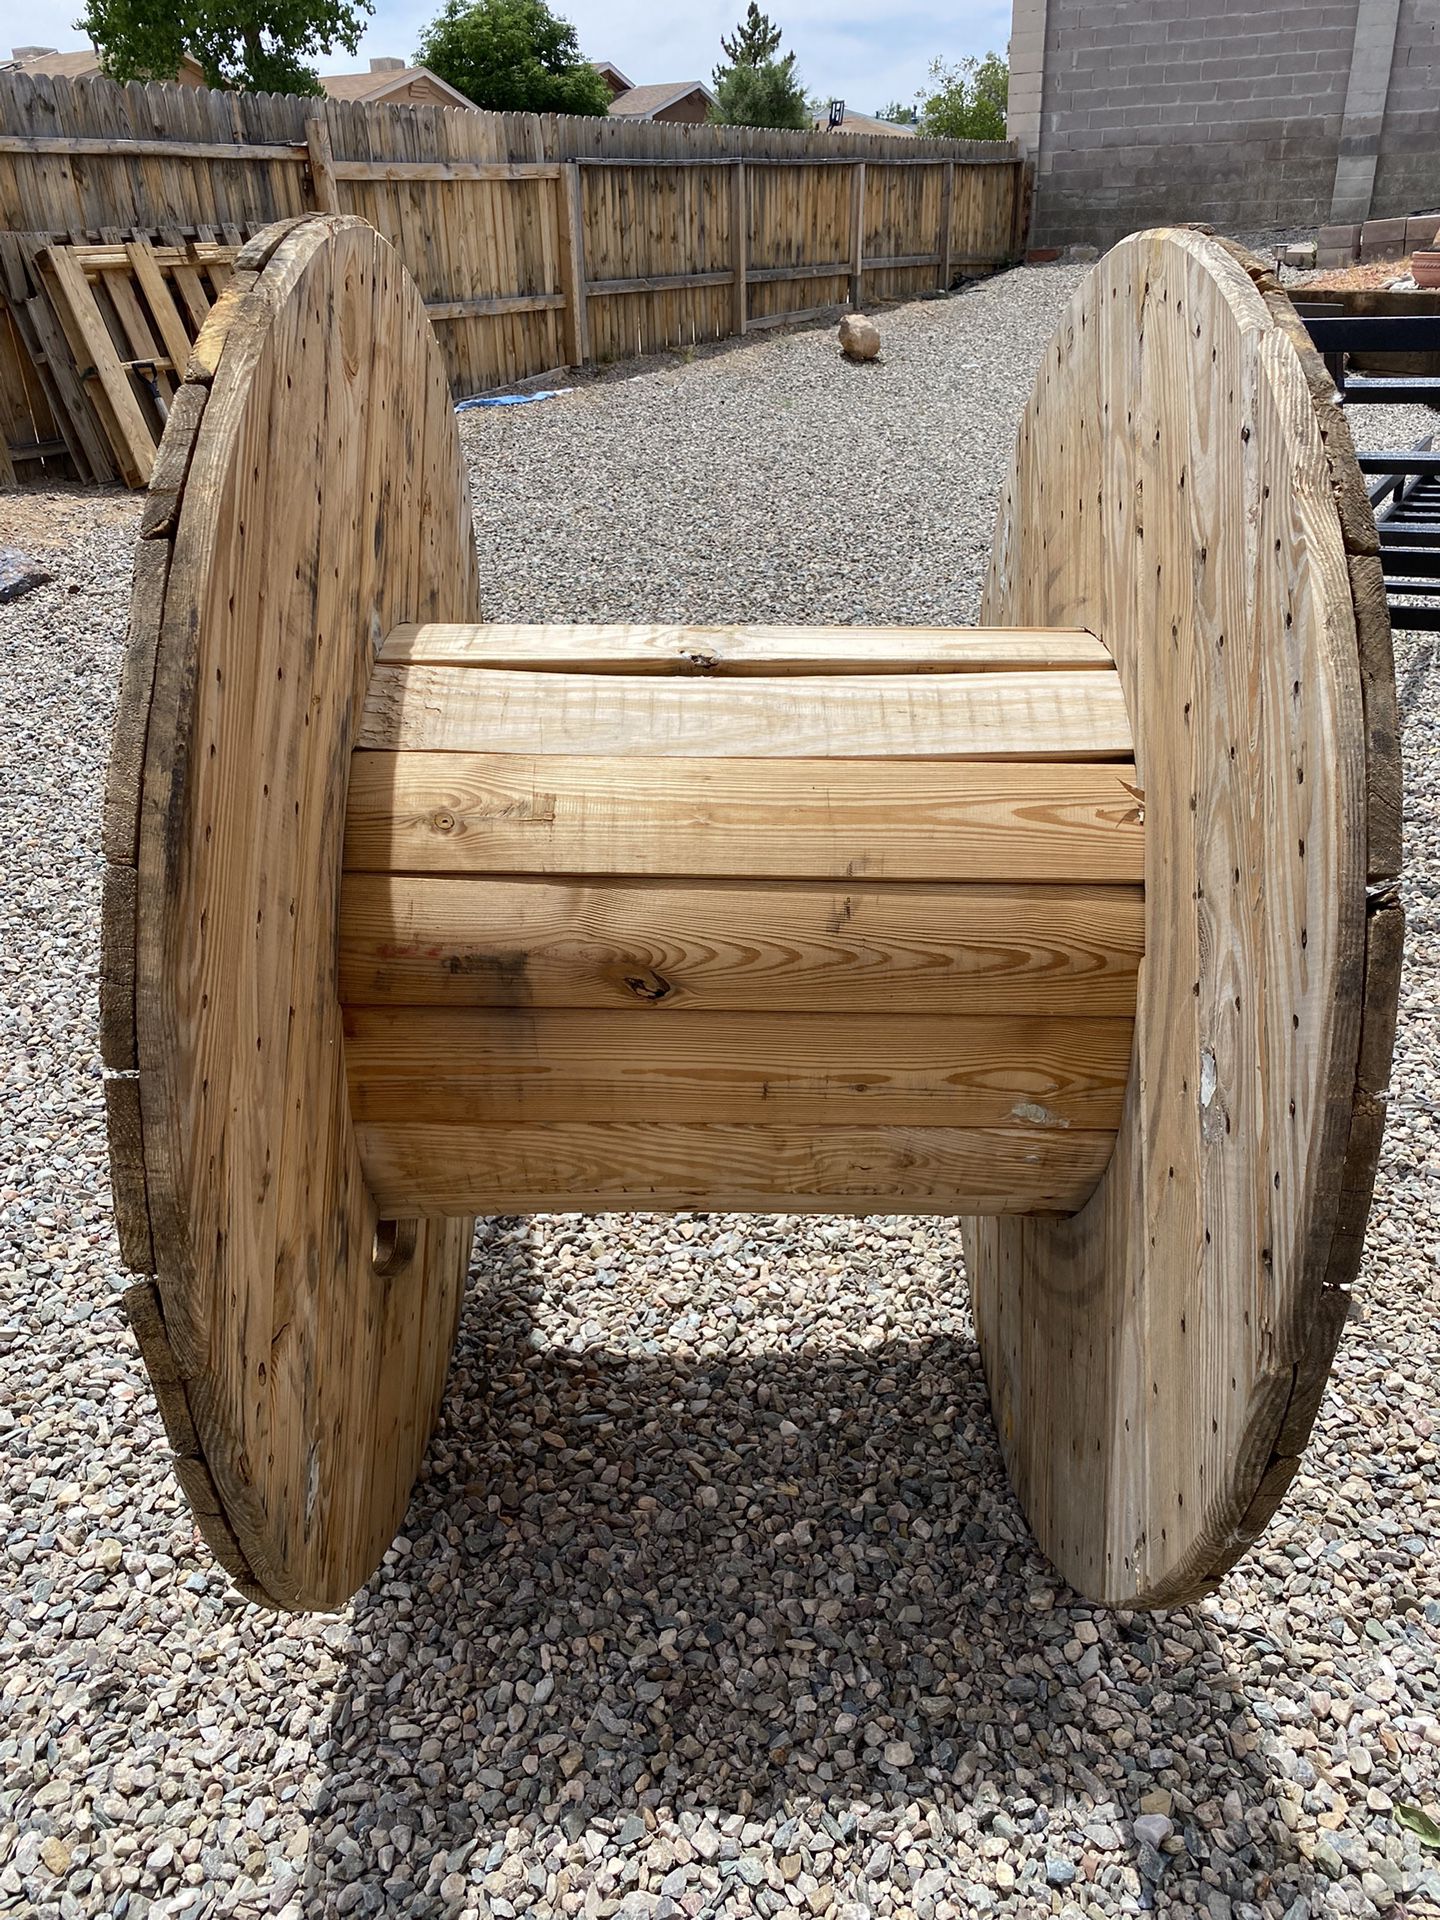 Large Wooden Cable Spool for Sale in Albuquerque, NM - OfferUp